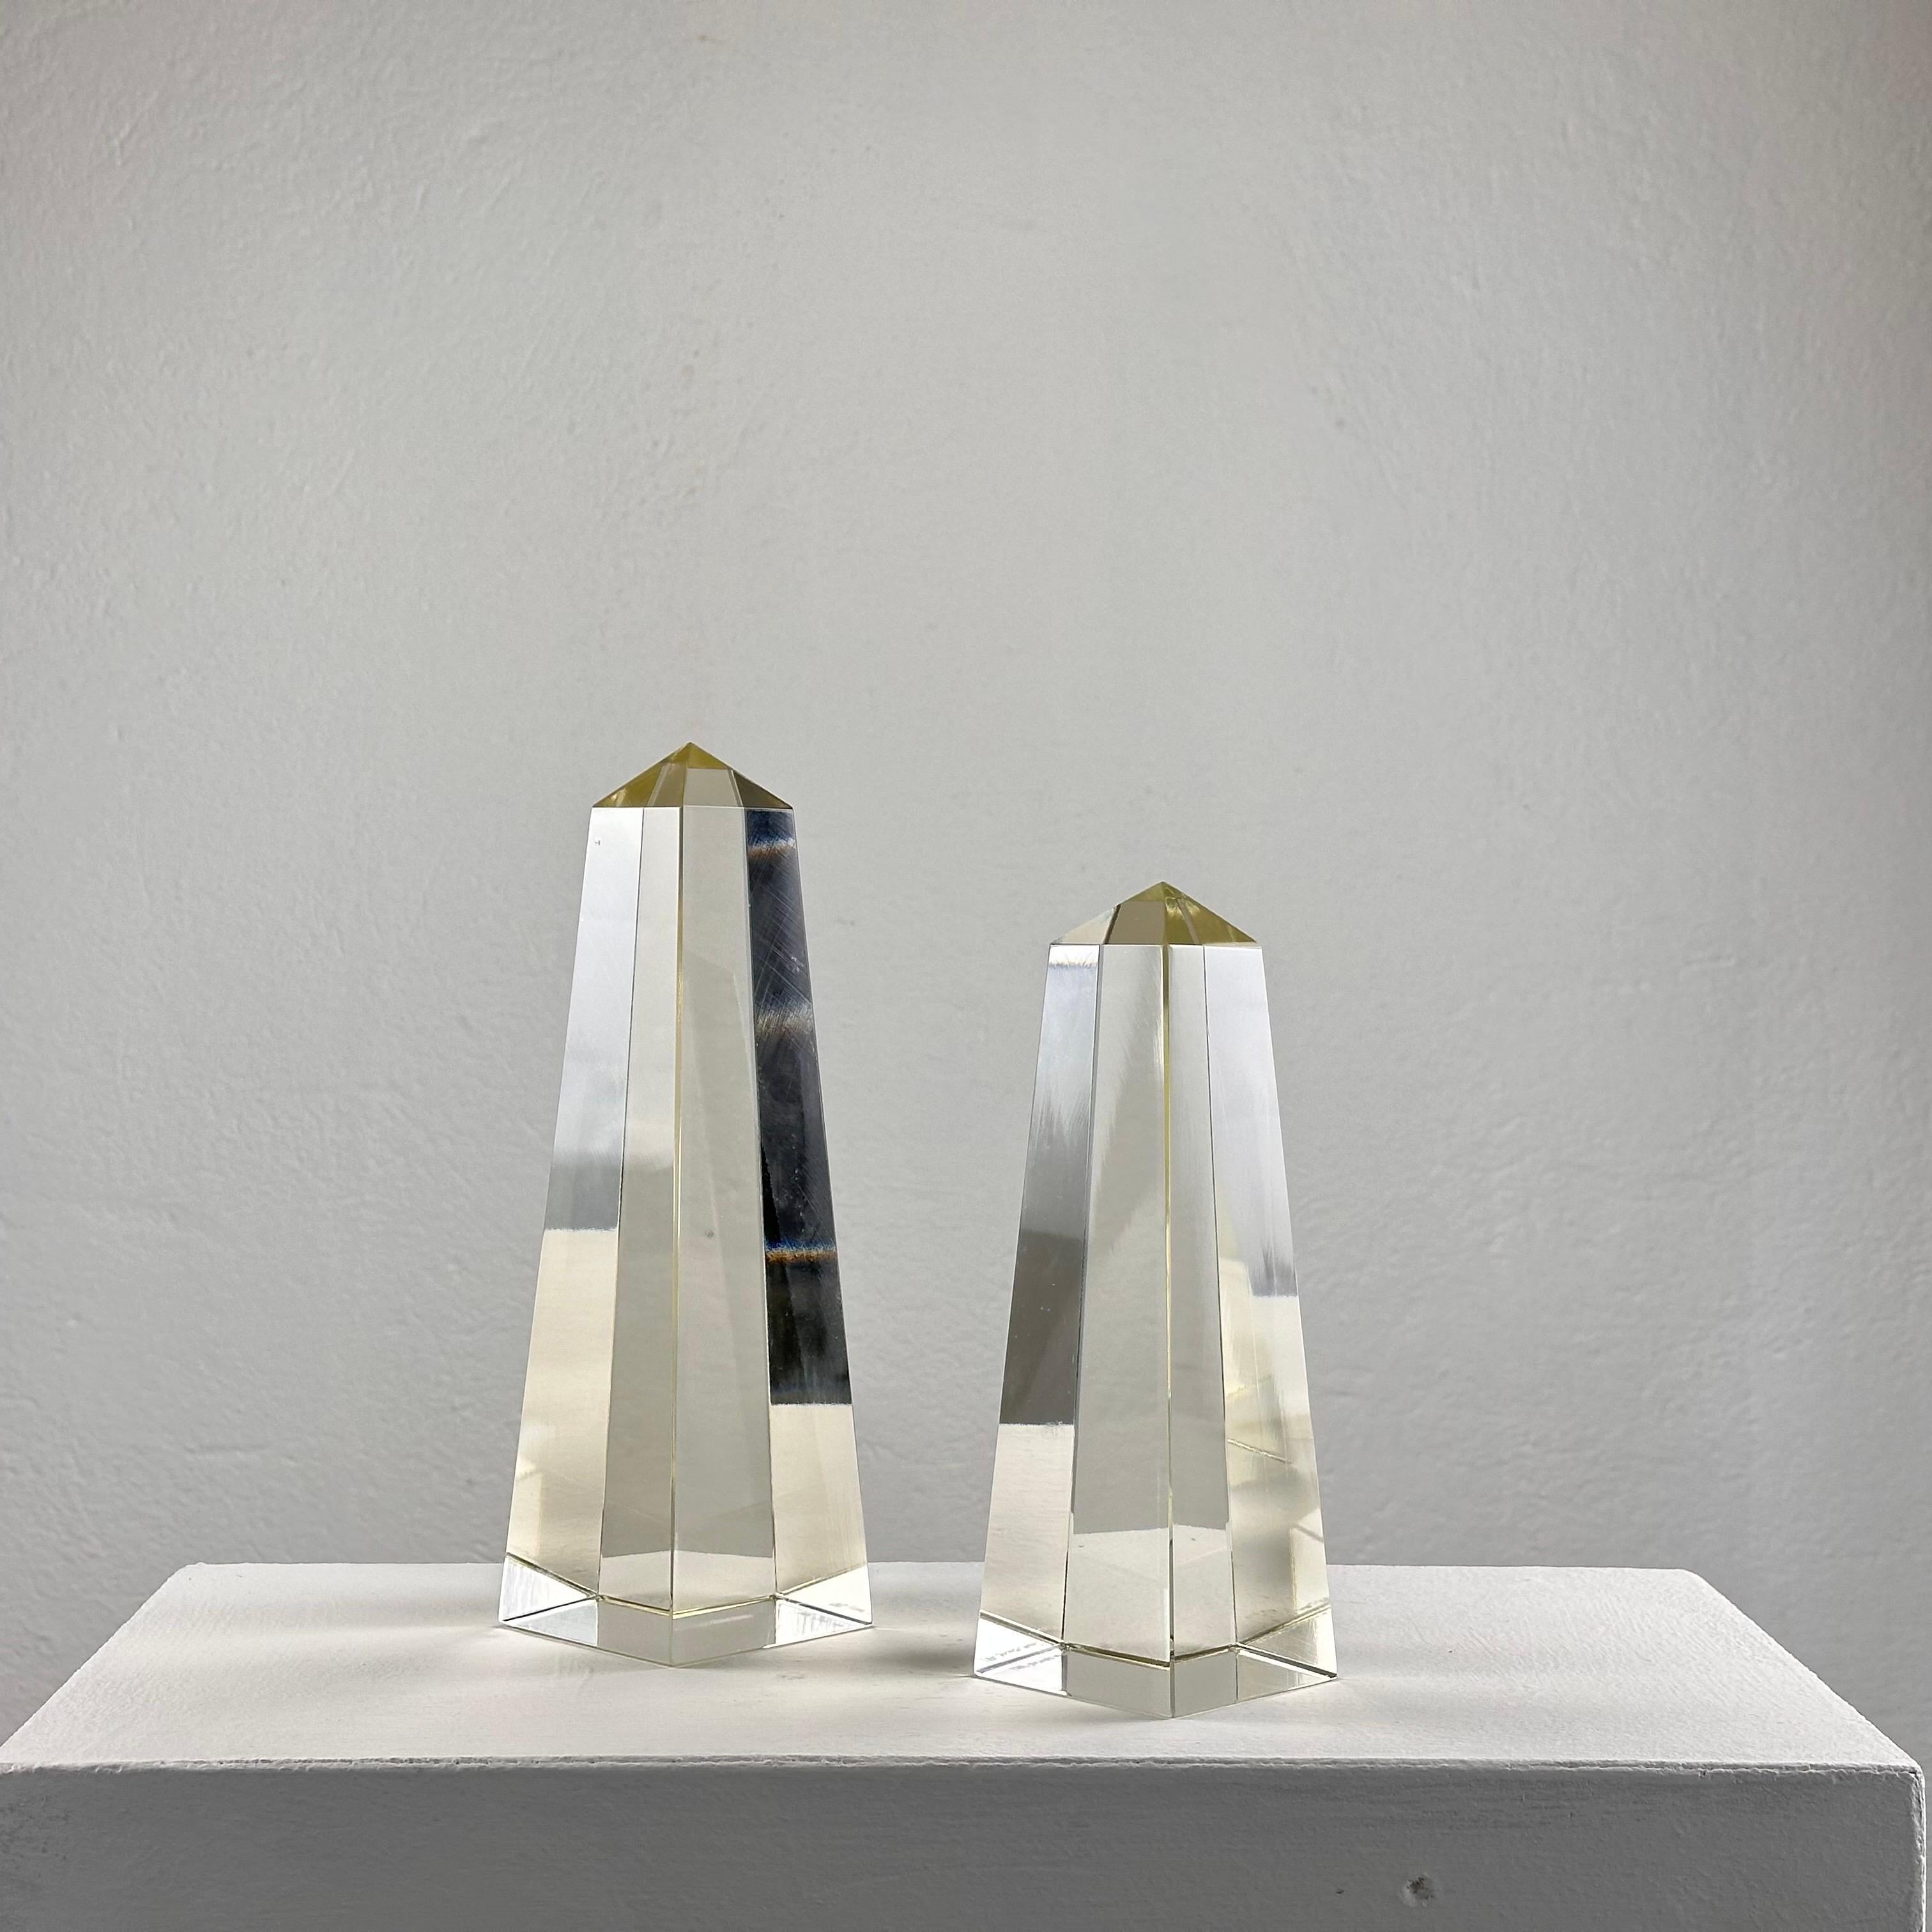 Add a touch of timeless elegance to your space with this pair of decorative obelisks crafted in pure glass, signed 